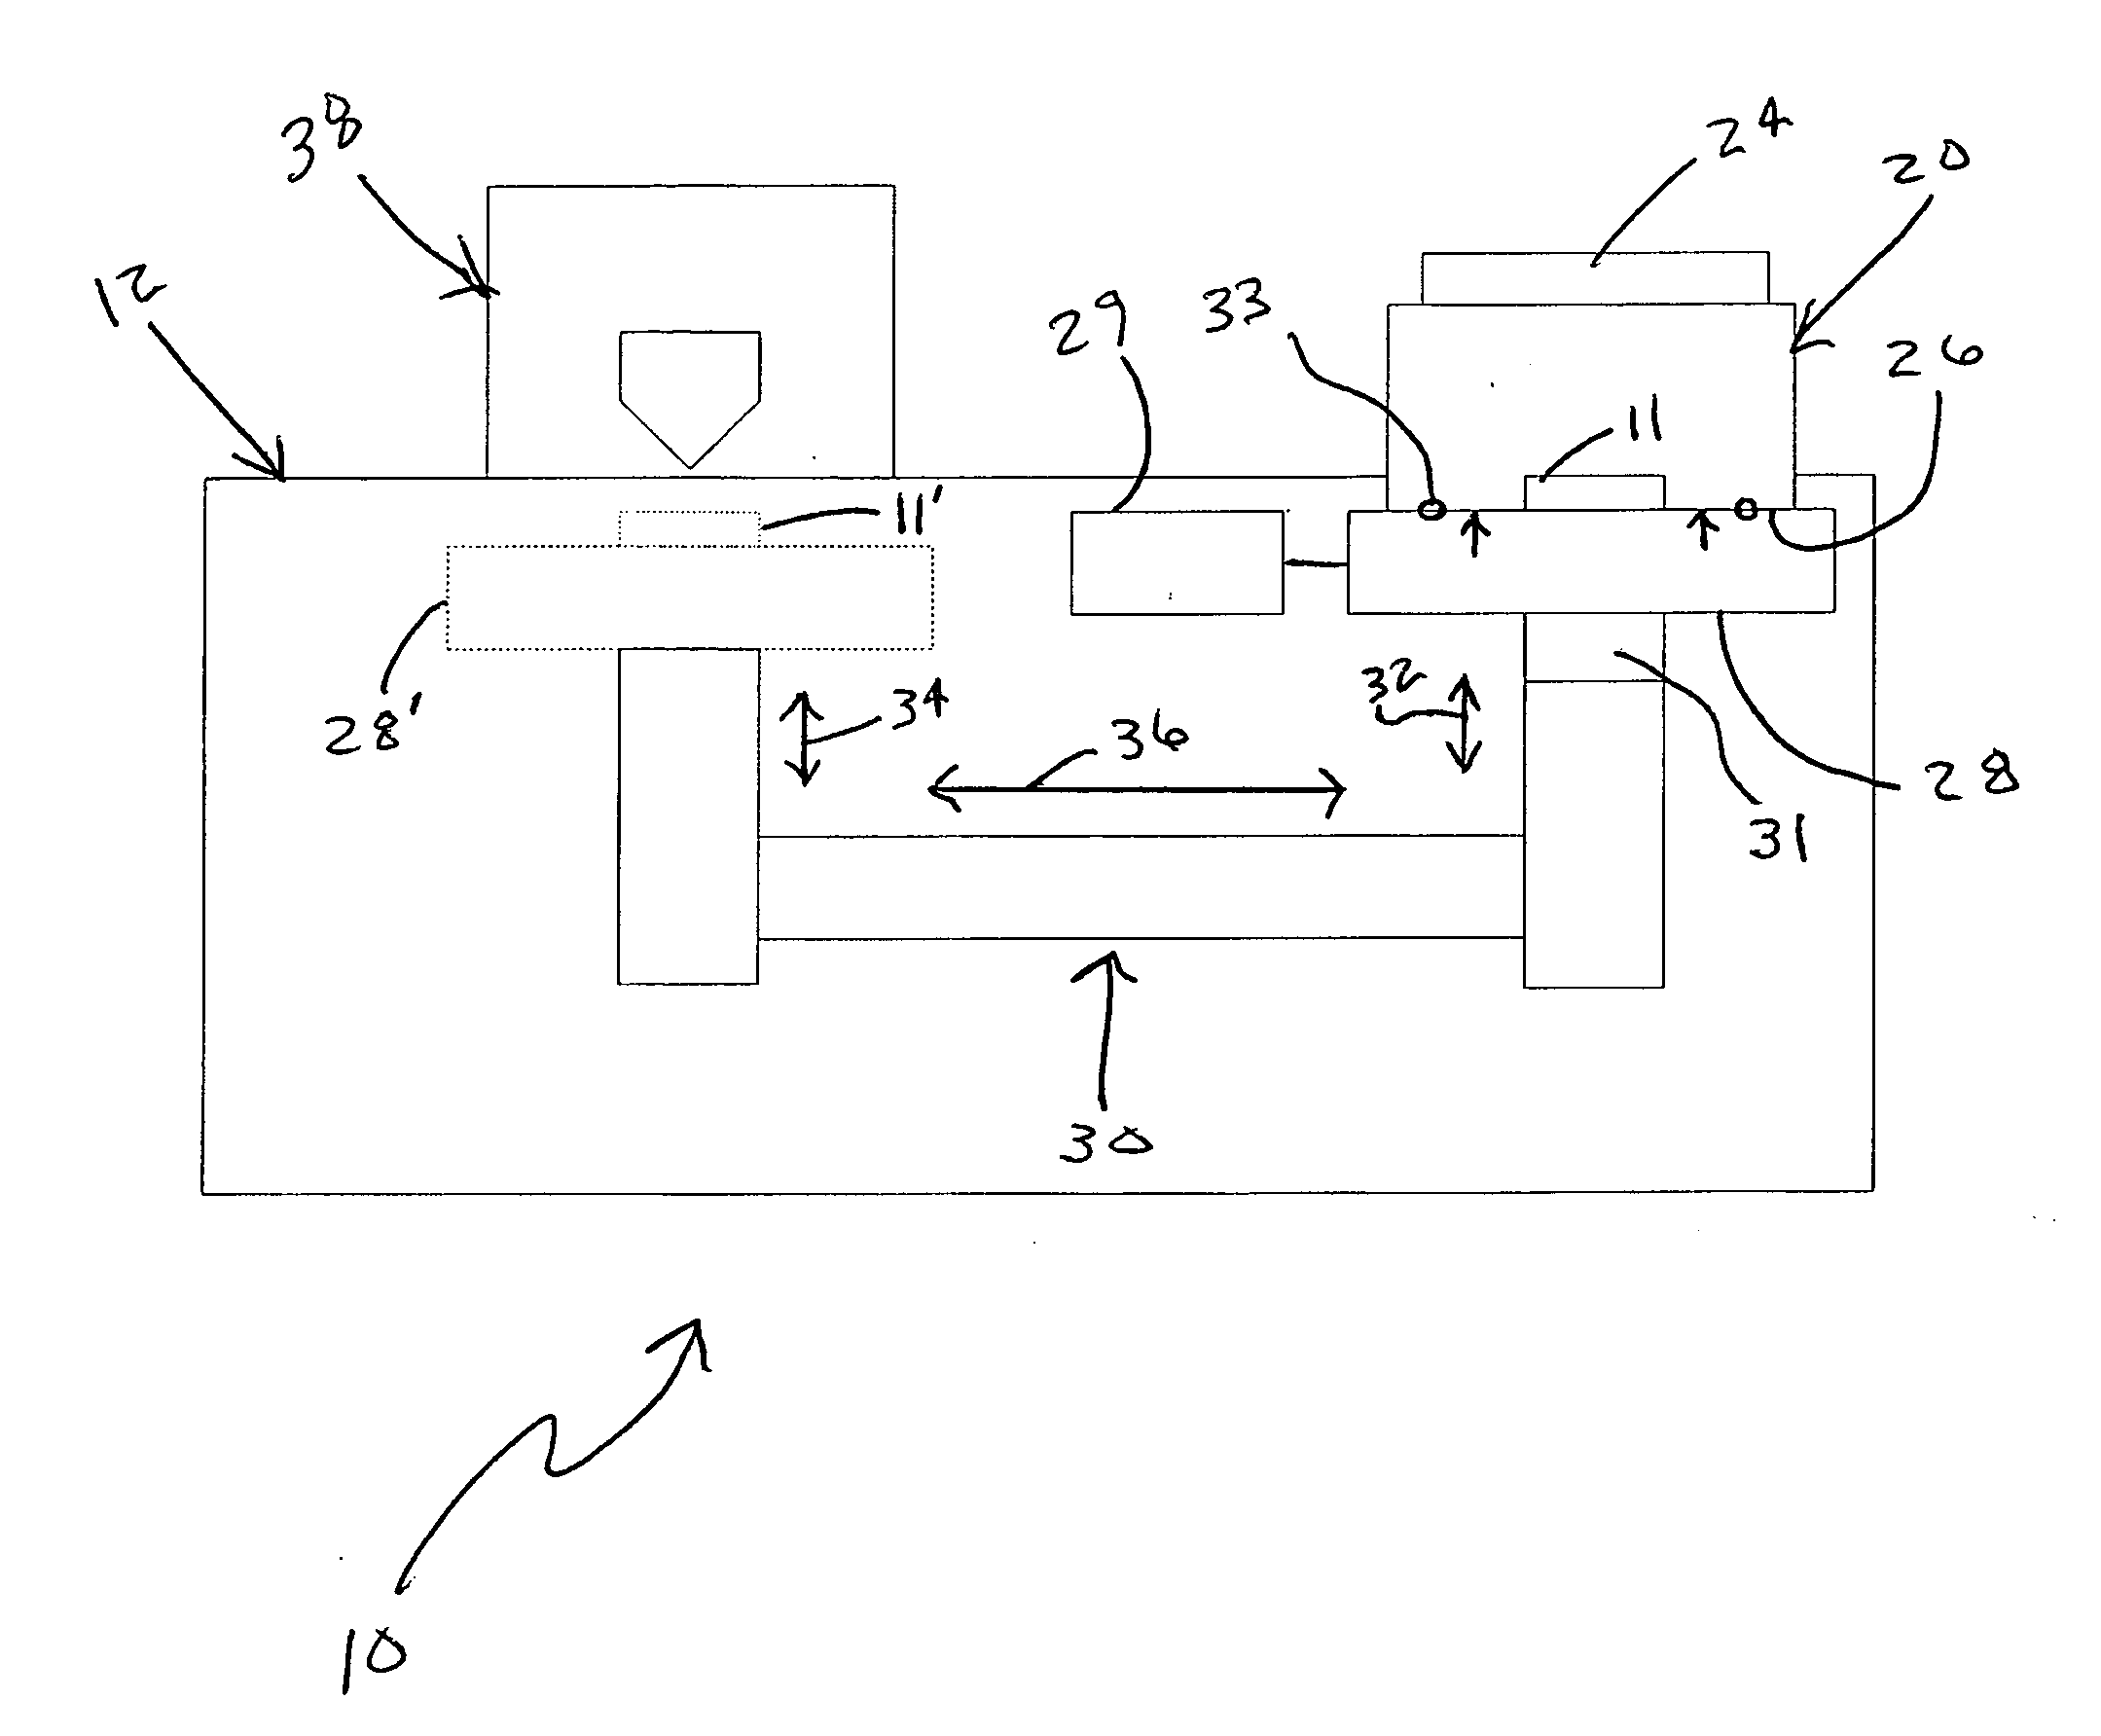 Sample introduction and transfer system and method